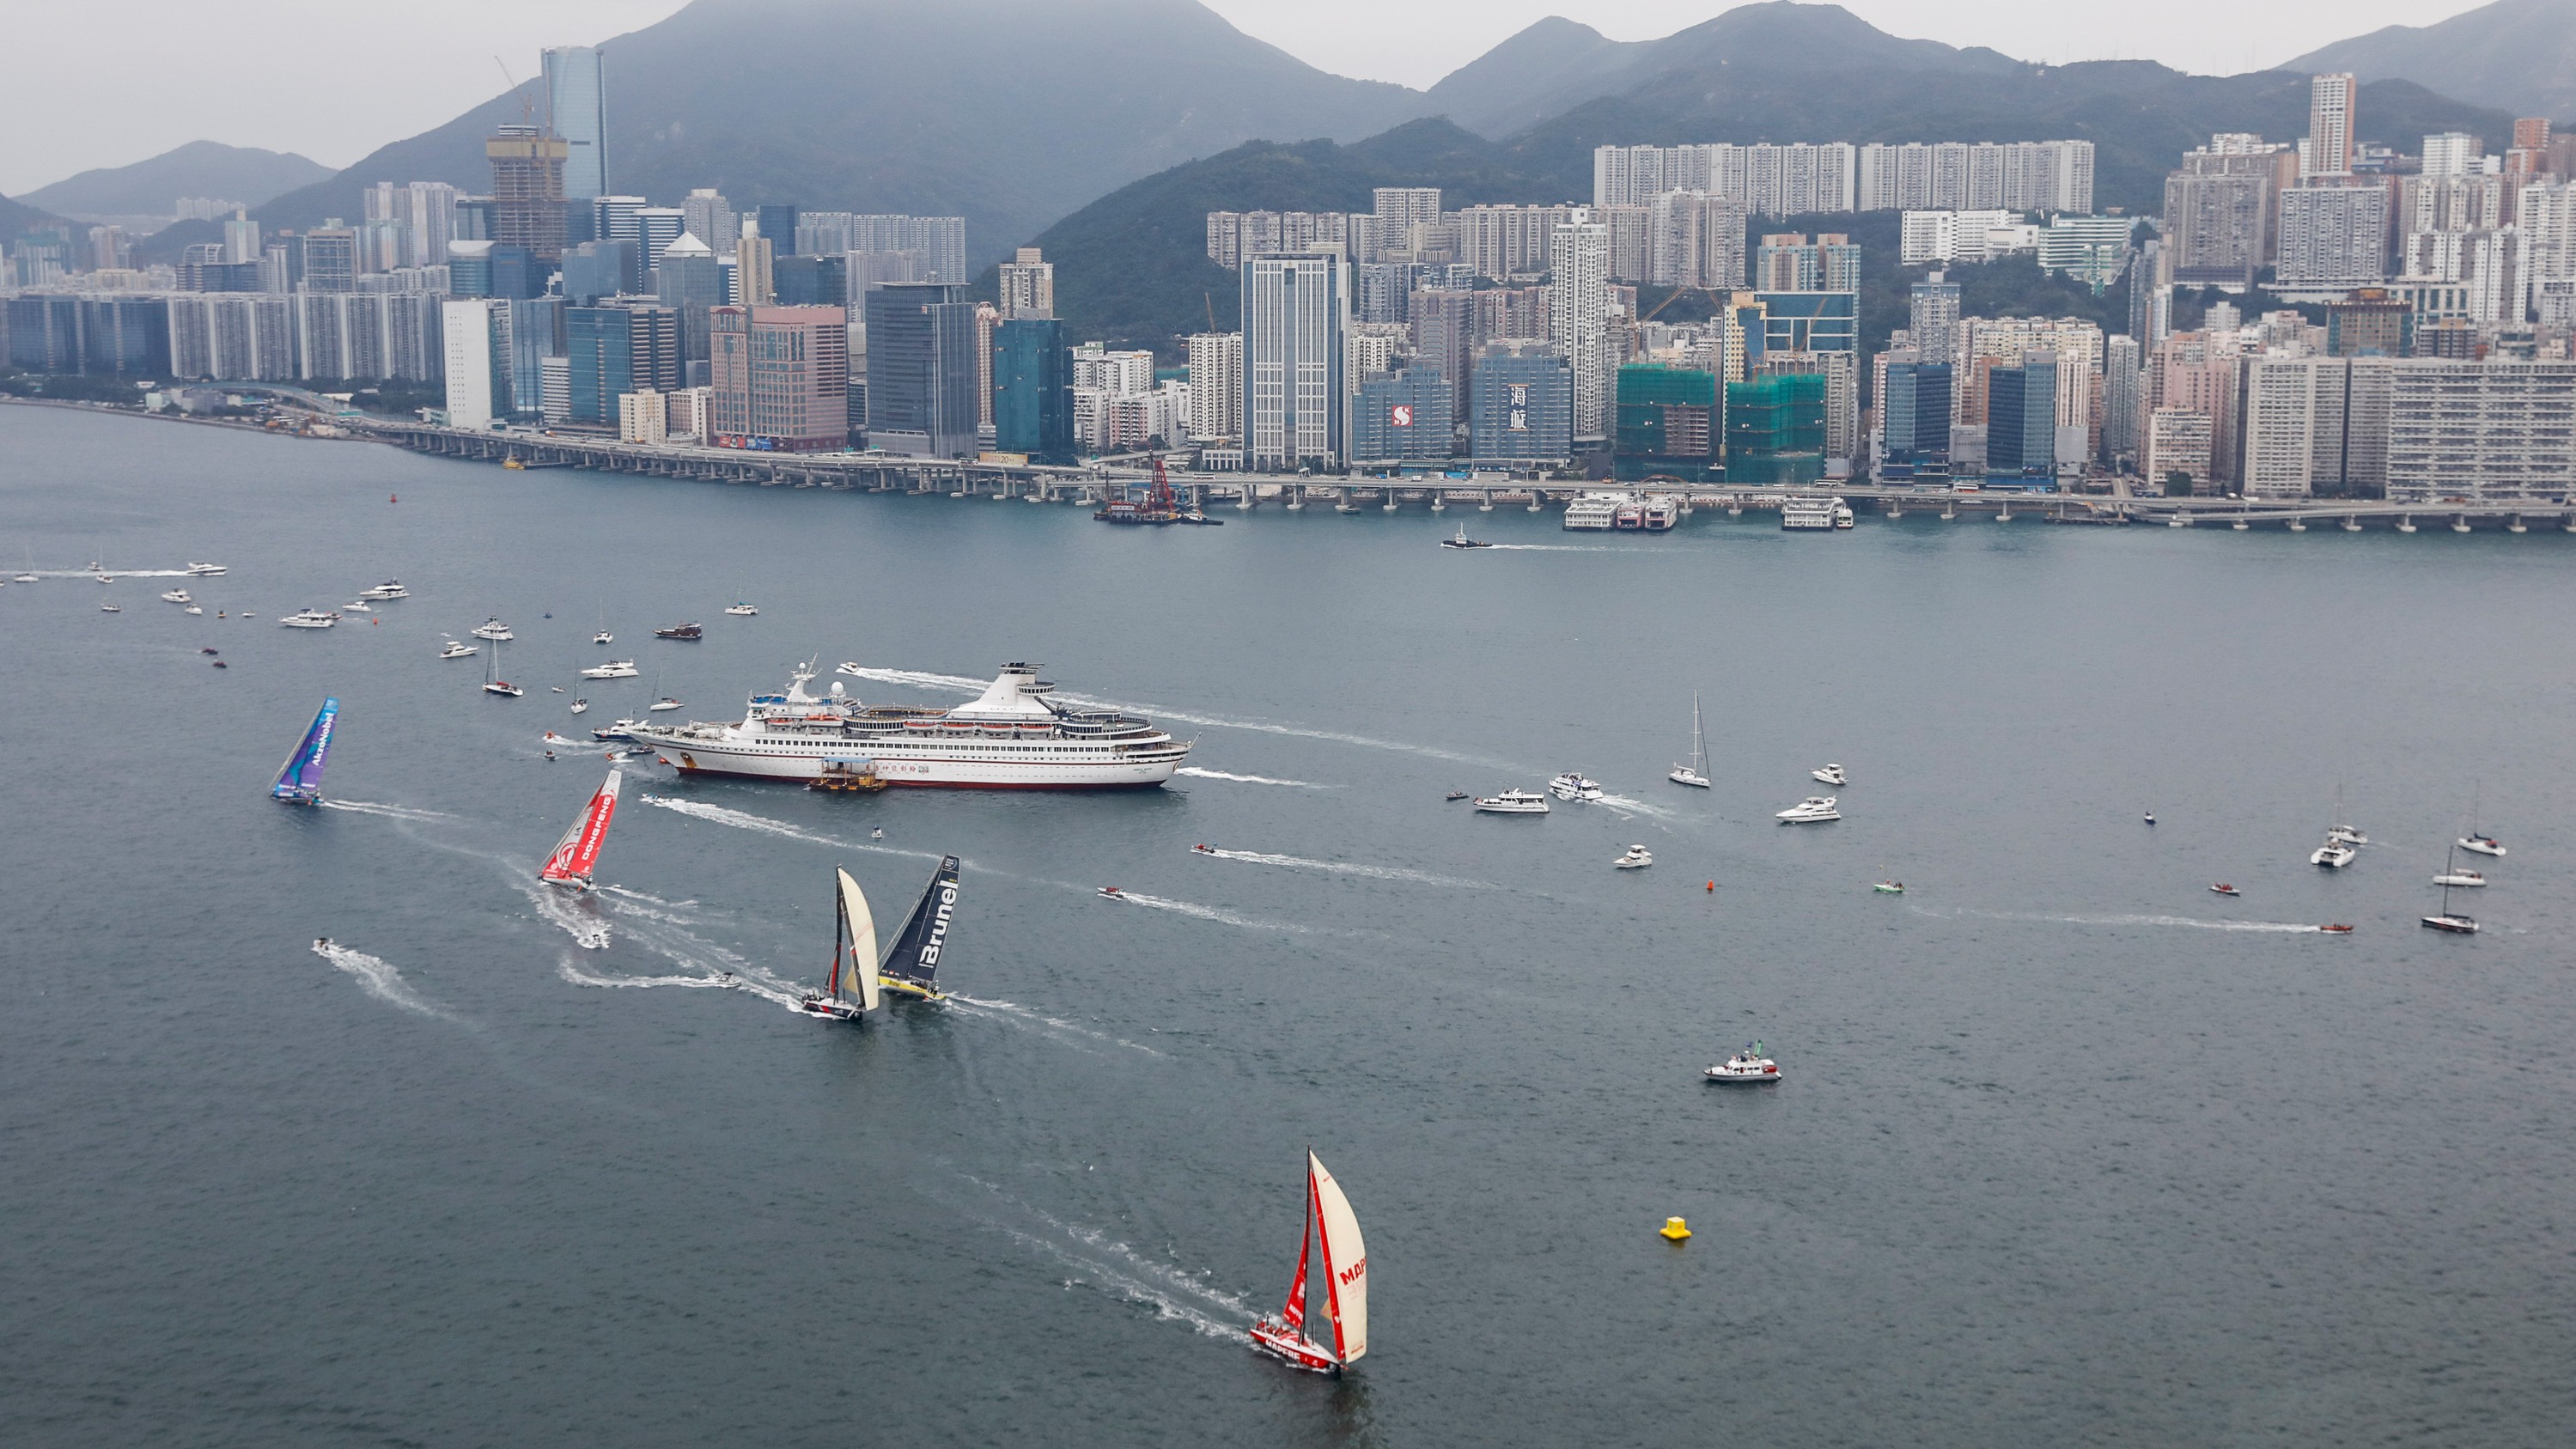 Ocean Race boats compete in an in-port race in Hong Kong during the 2017-18 stopover in the city. Photo: Ainhoa Sanchez/Ocean Race